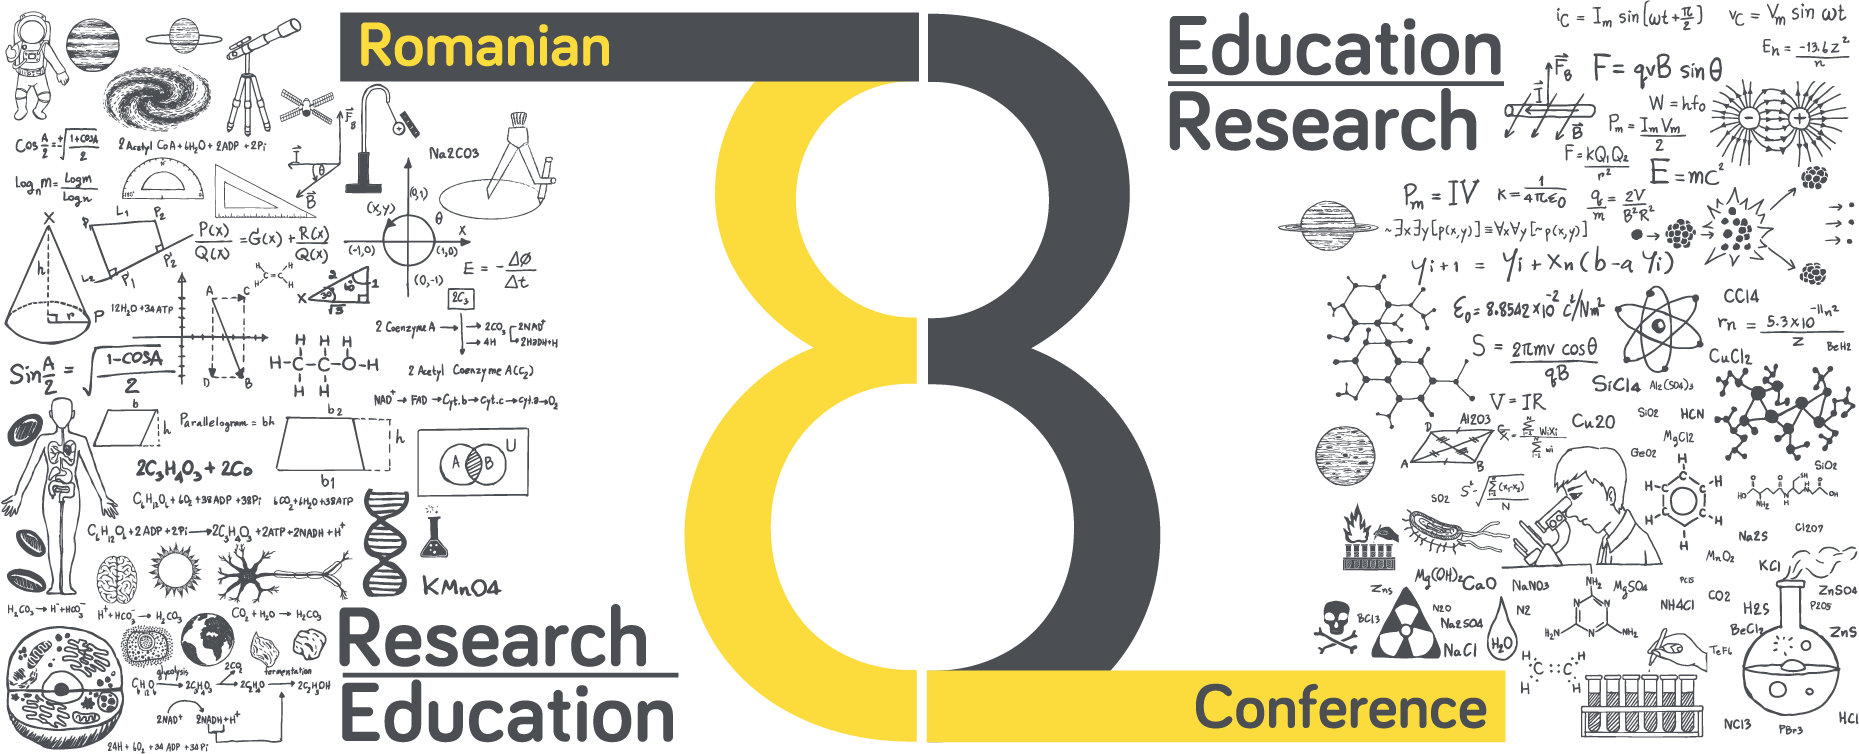 ROMANIAN CONFERENCE FOR EDUCATION AND RESEARCH 2020